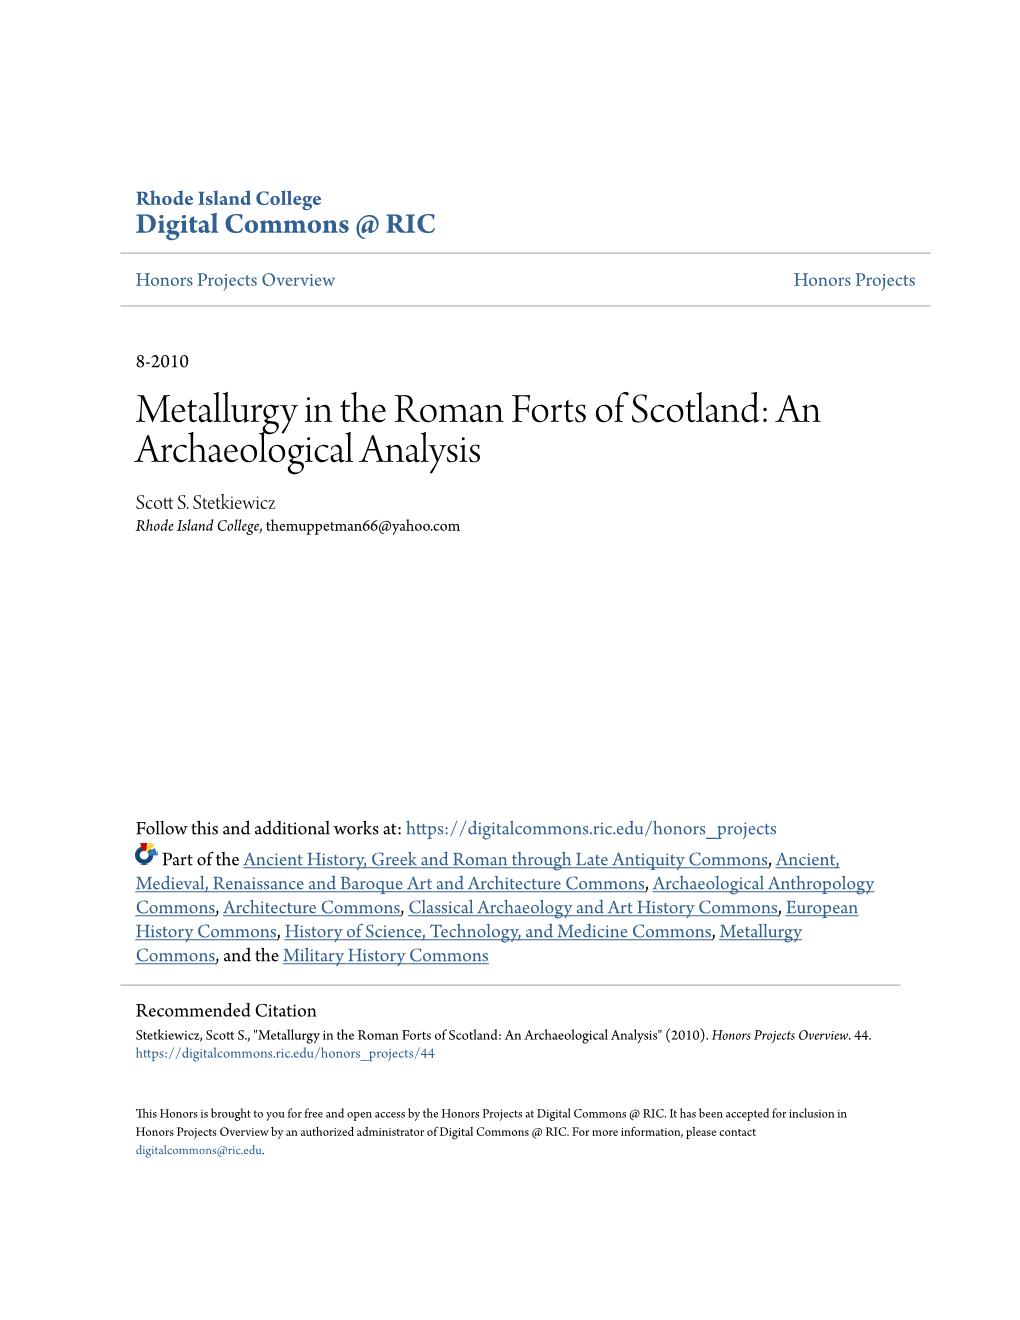 Metallurgy in the Roman Forts of Scotland: an Archaeological Analysis Scott .S Stetkiewicz Rhode Island College, Themuppetman66@Yahoo.Com